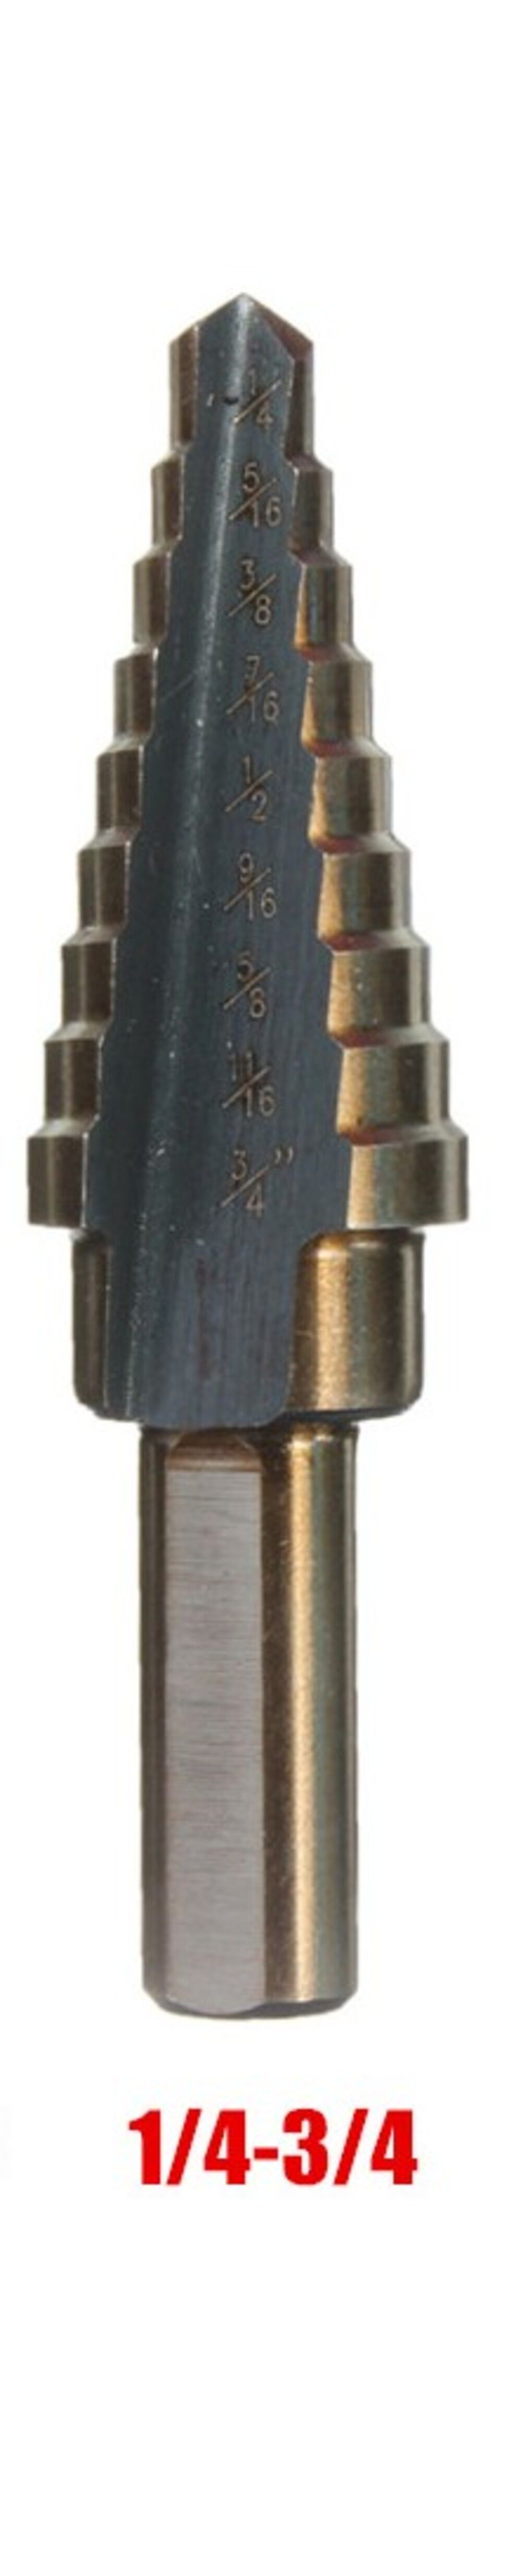 1/4-3/4" HIGH SPEED STEEL STEP DRILL WITH 9 STEPS (5000-0015)